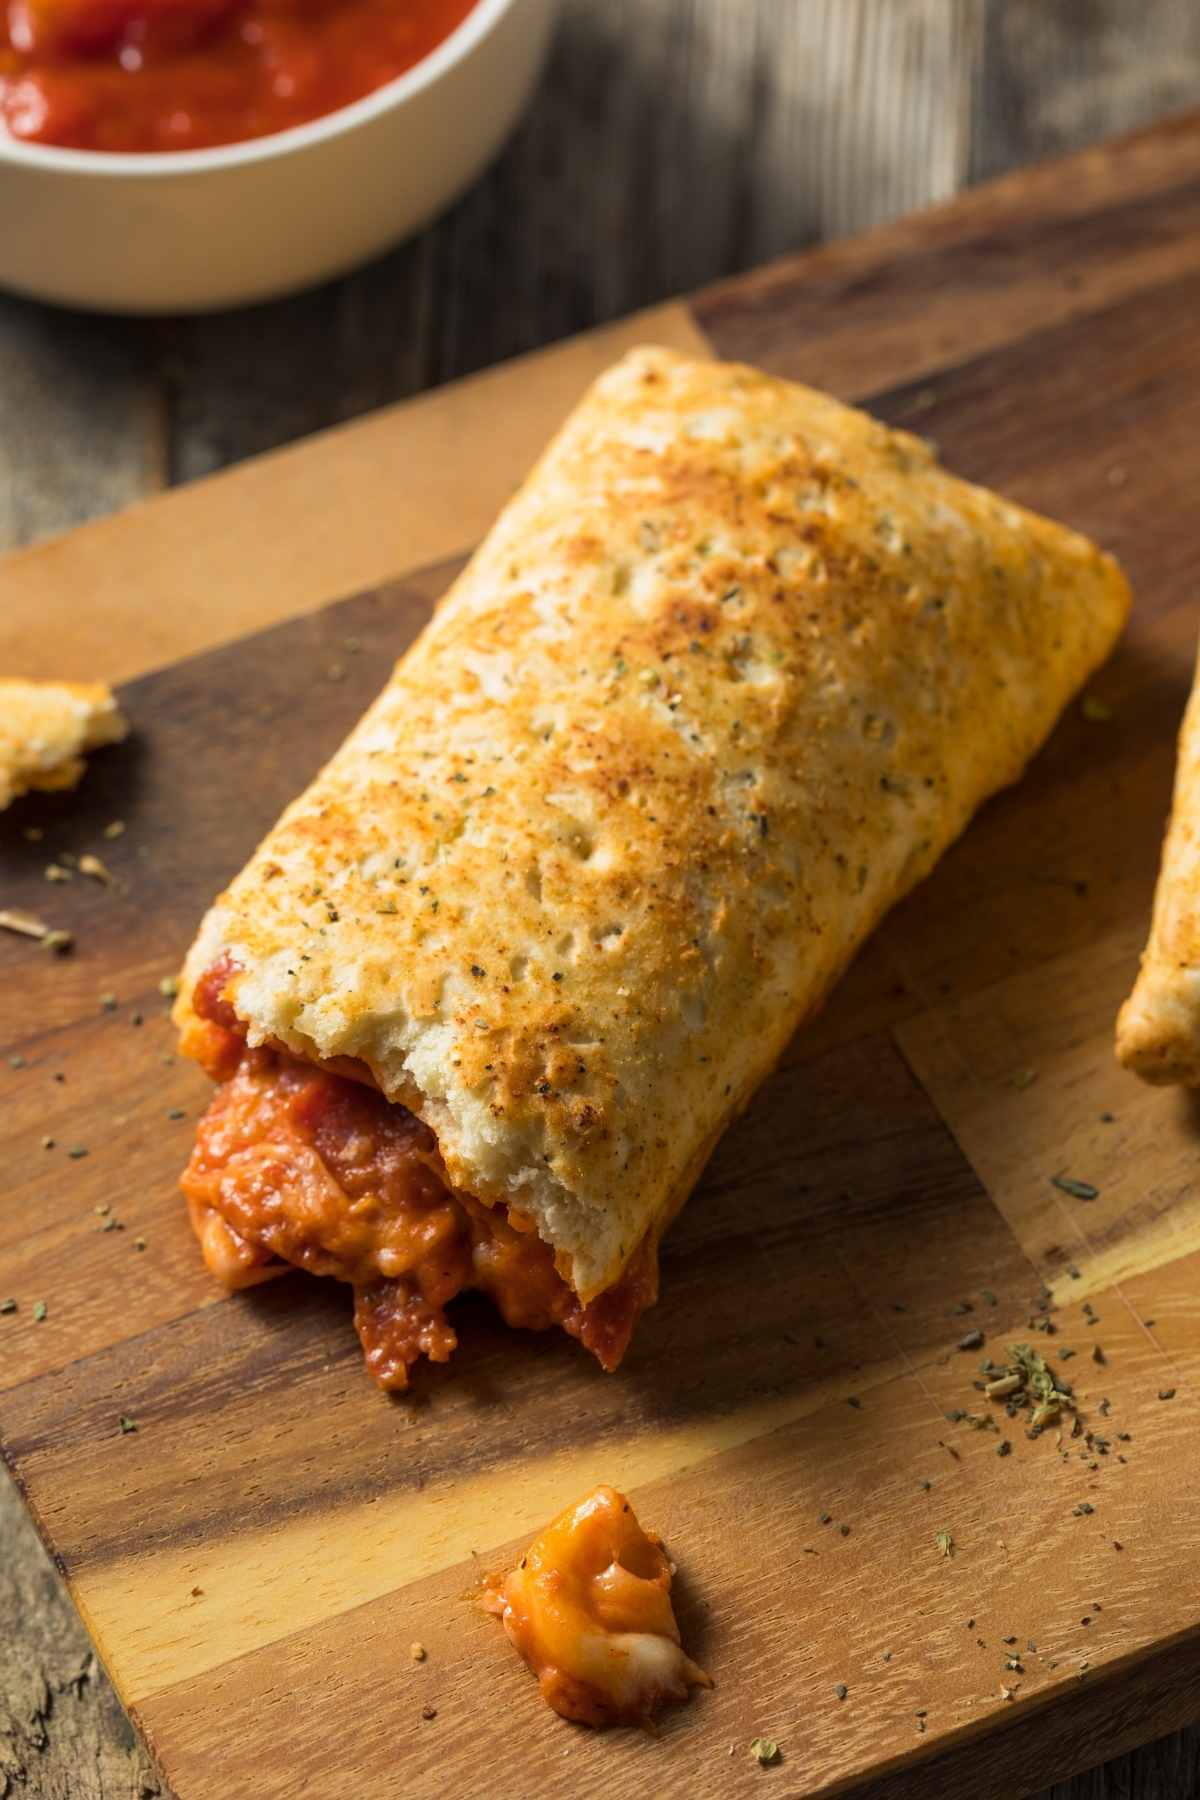 Hot Pockets are tasty snacks enjoyed by kids and adults alike. If you’re new to these savory treats, they can easily be made at home!